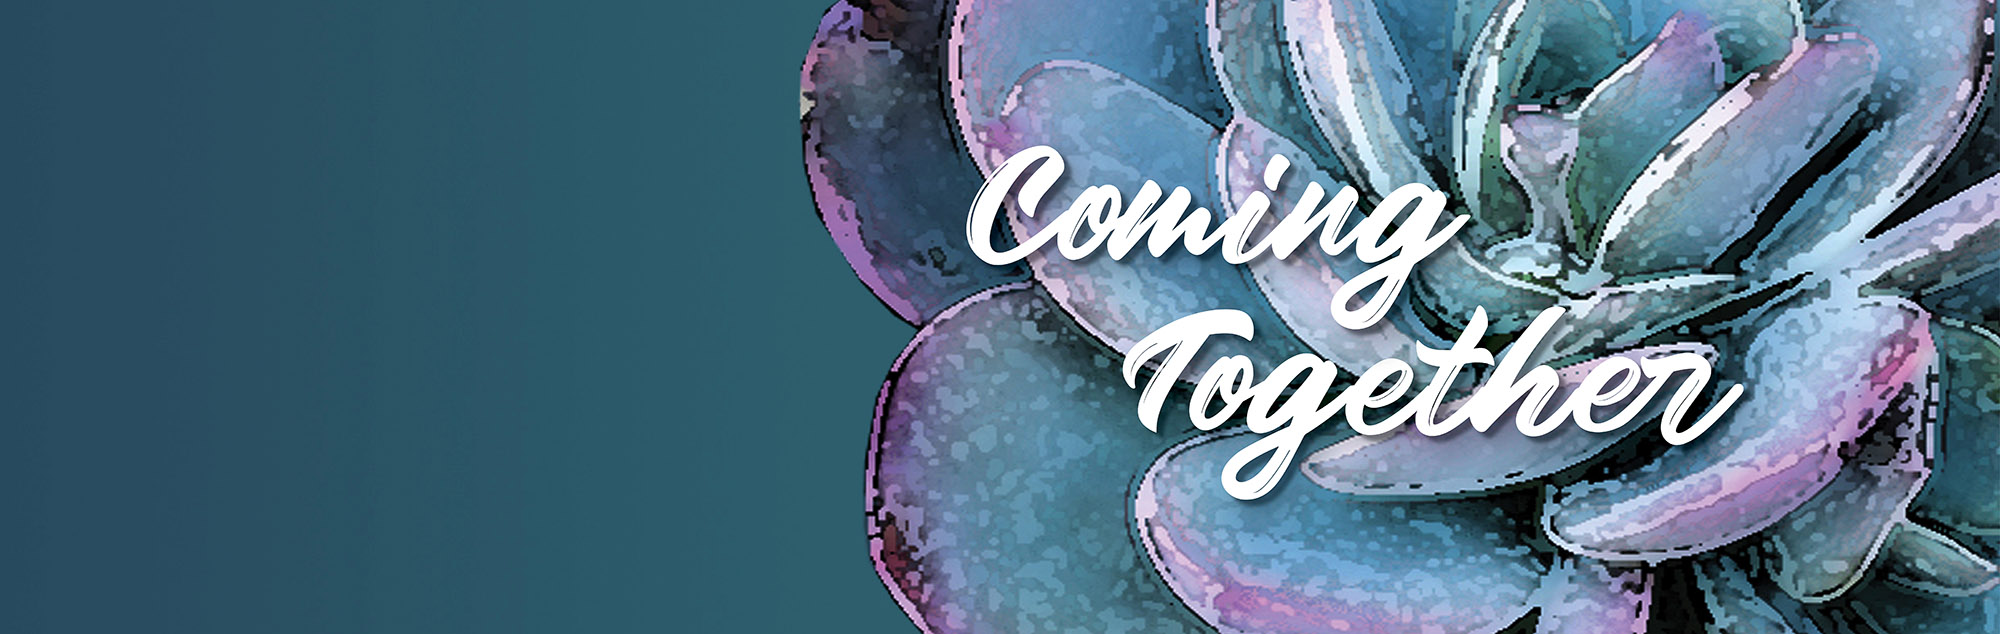 image of a succulent plant with text "Coming Together"